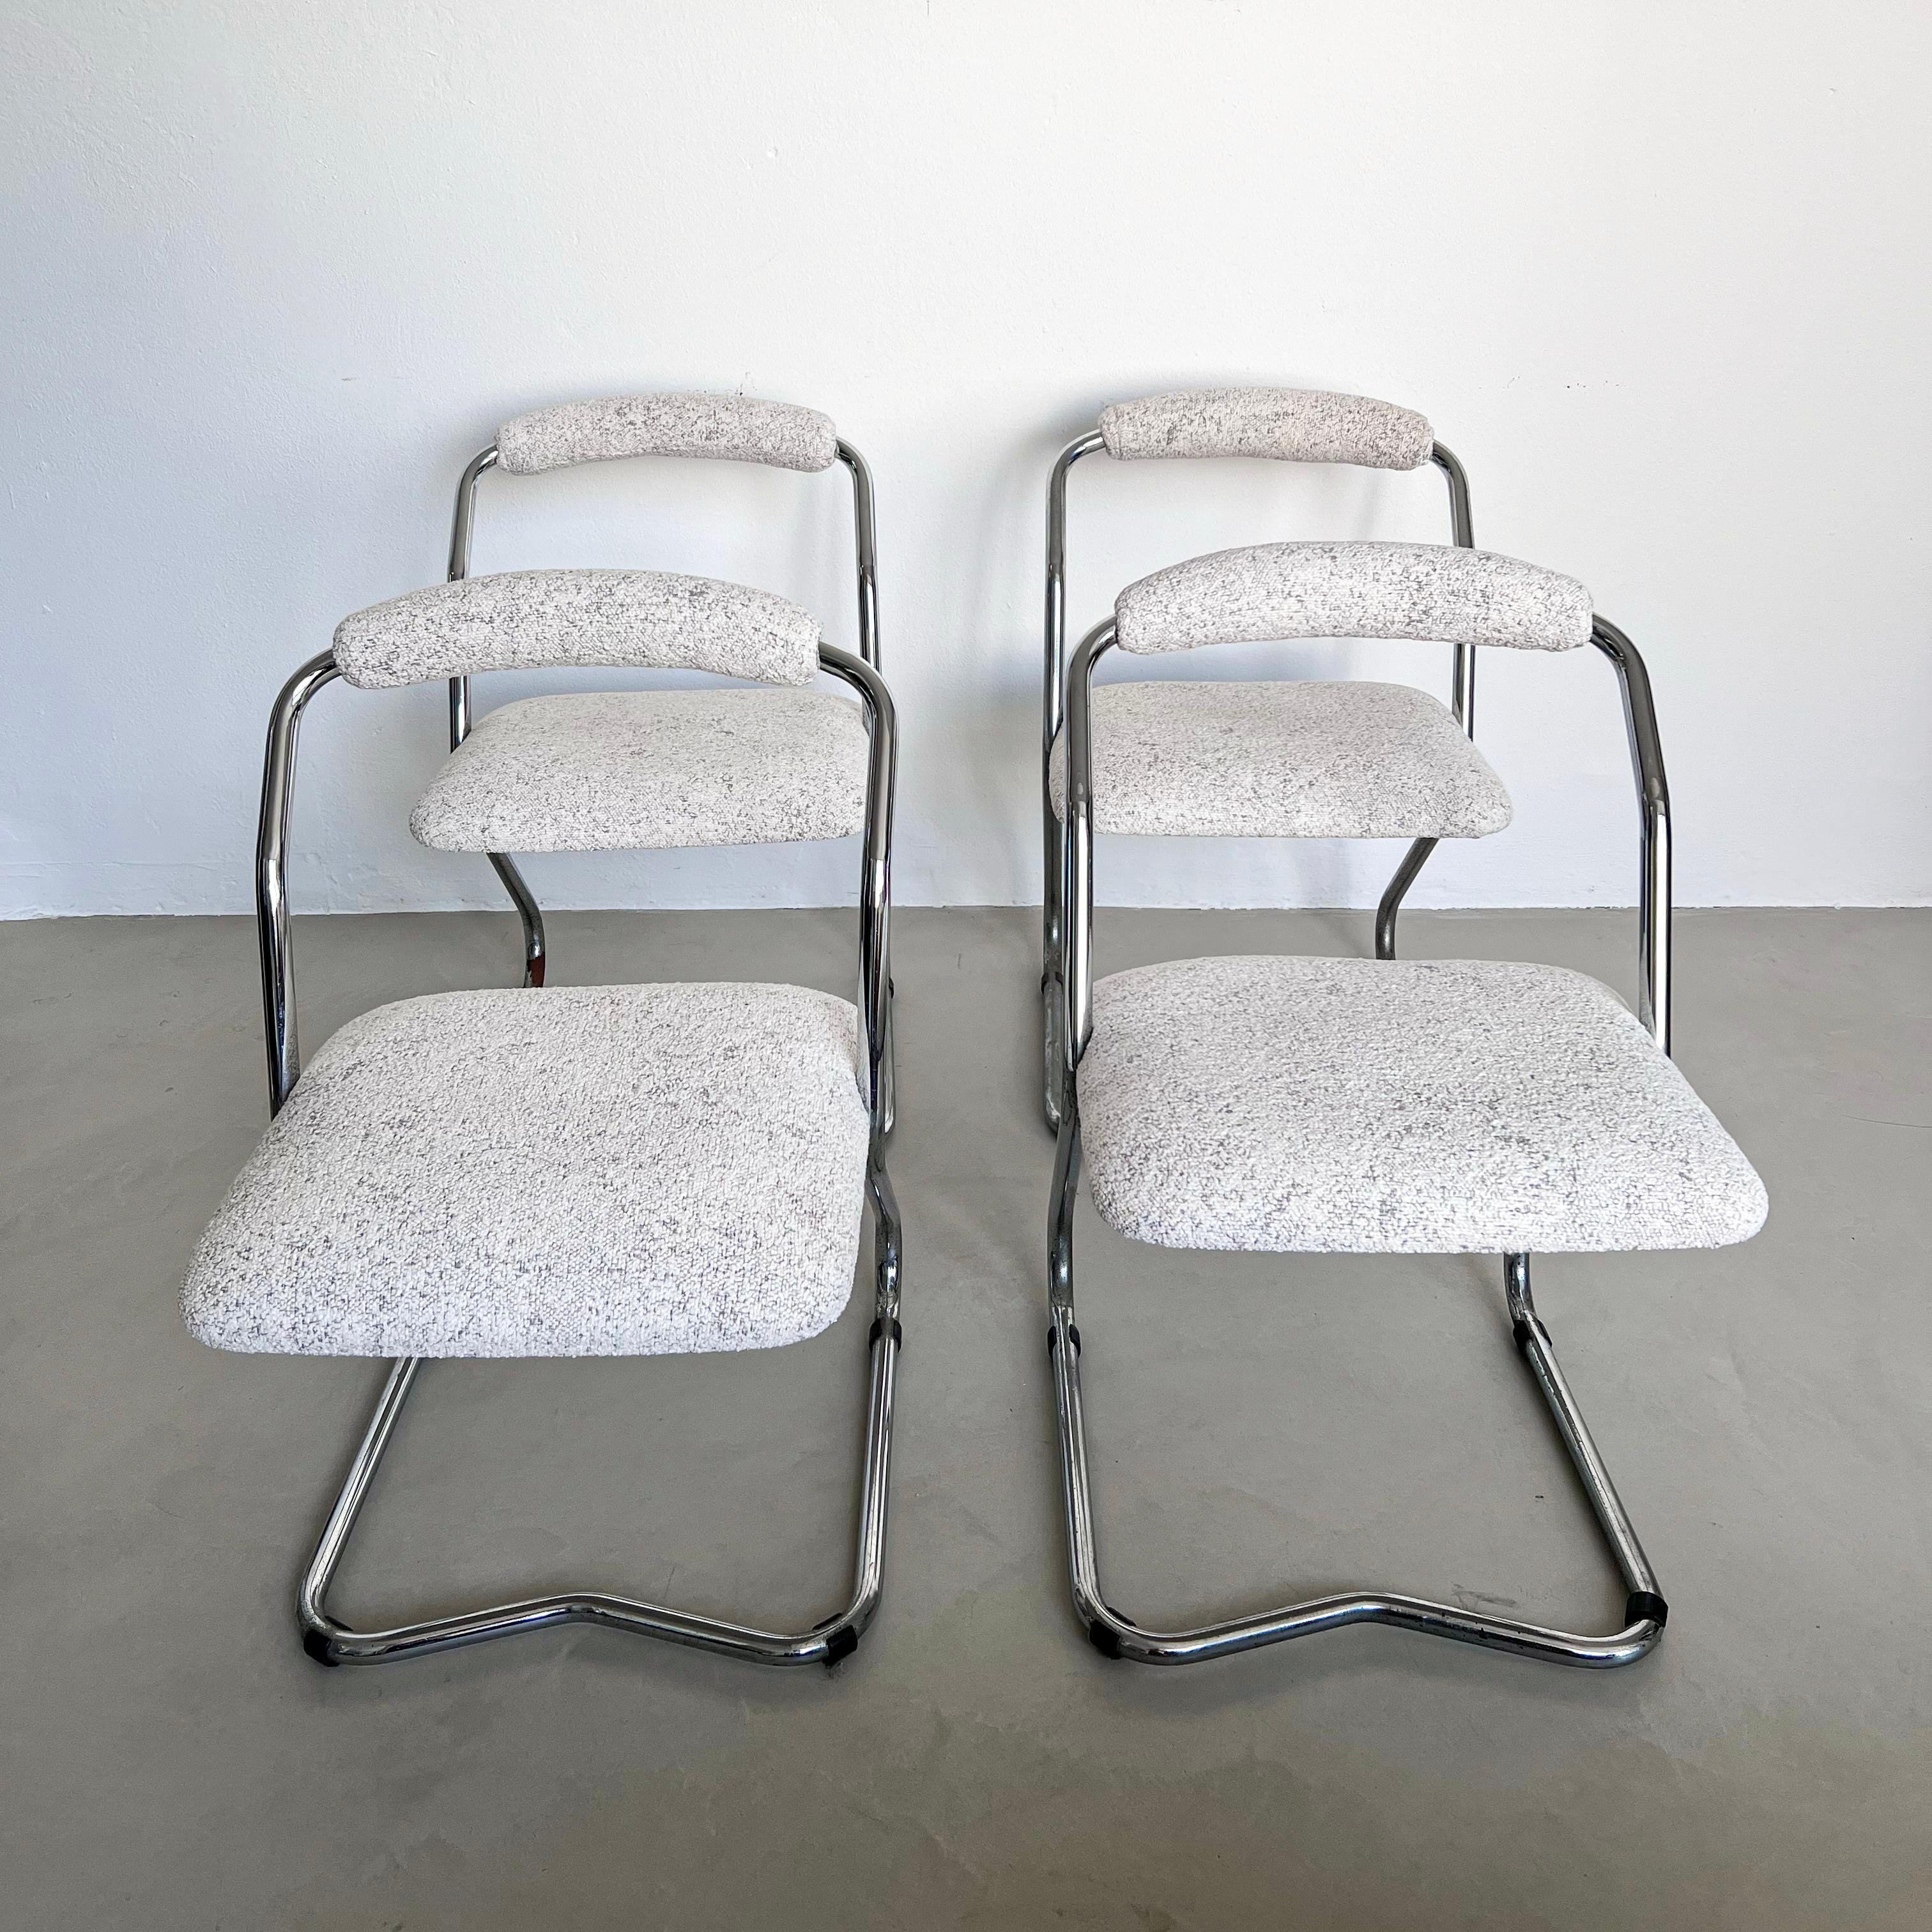 Set of four rare dining chairs, made in Italy in the 1960s and designed by Giotto Stoppino. Originally upholstered in tobacco brown faux leather, they have just been redone in a beautiful white bouclé fabric by Dedar Milano. Crafted in chromed metal